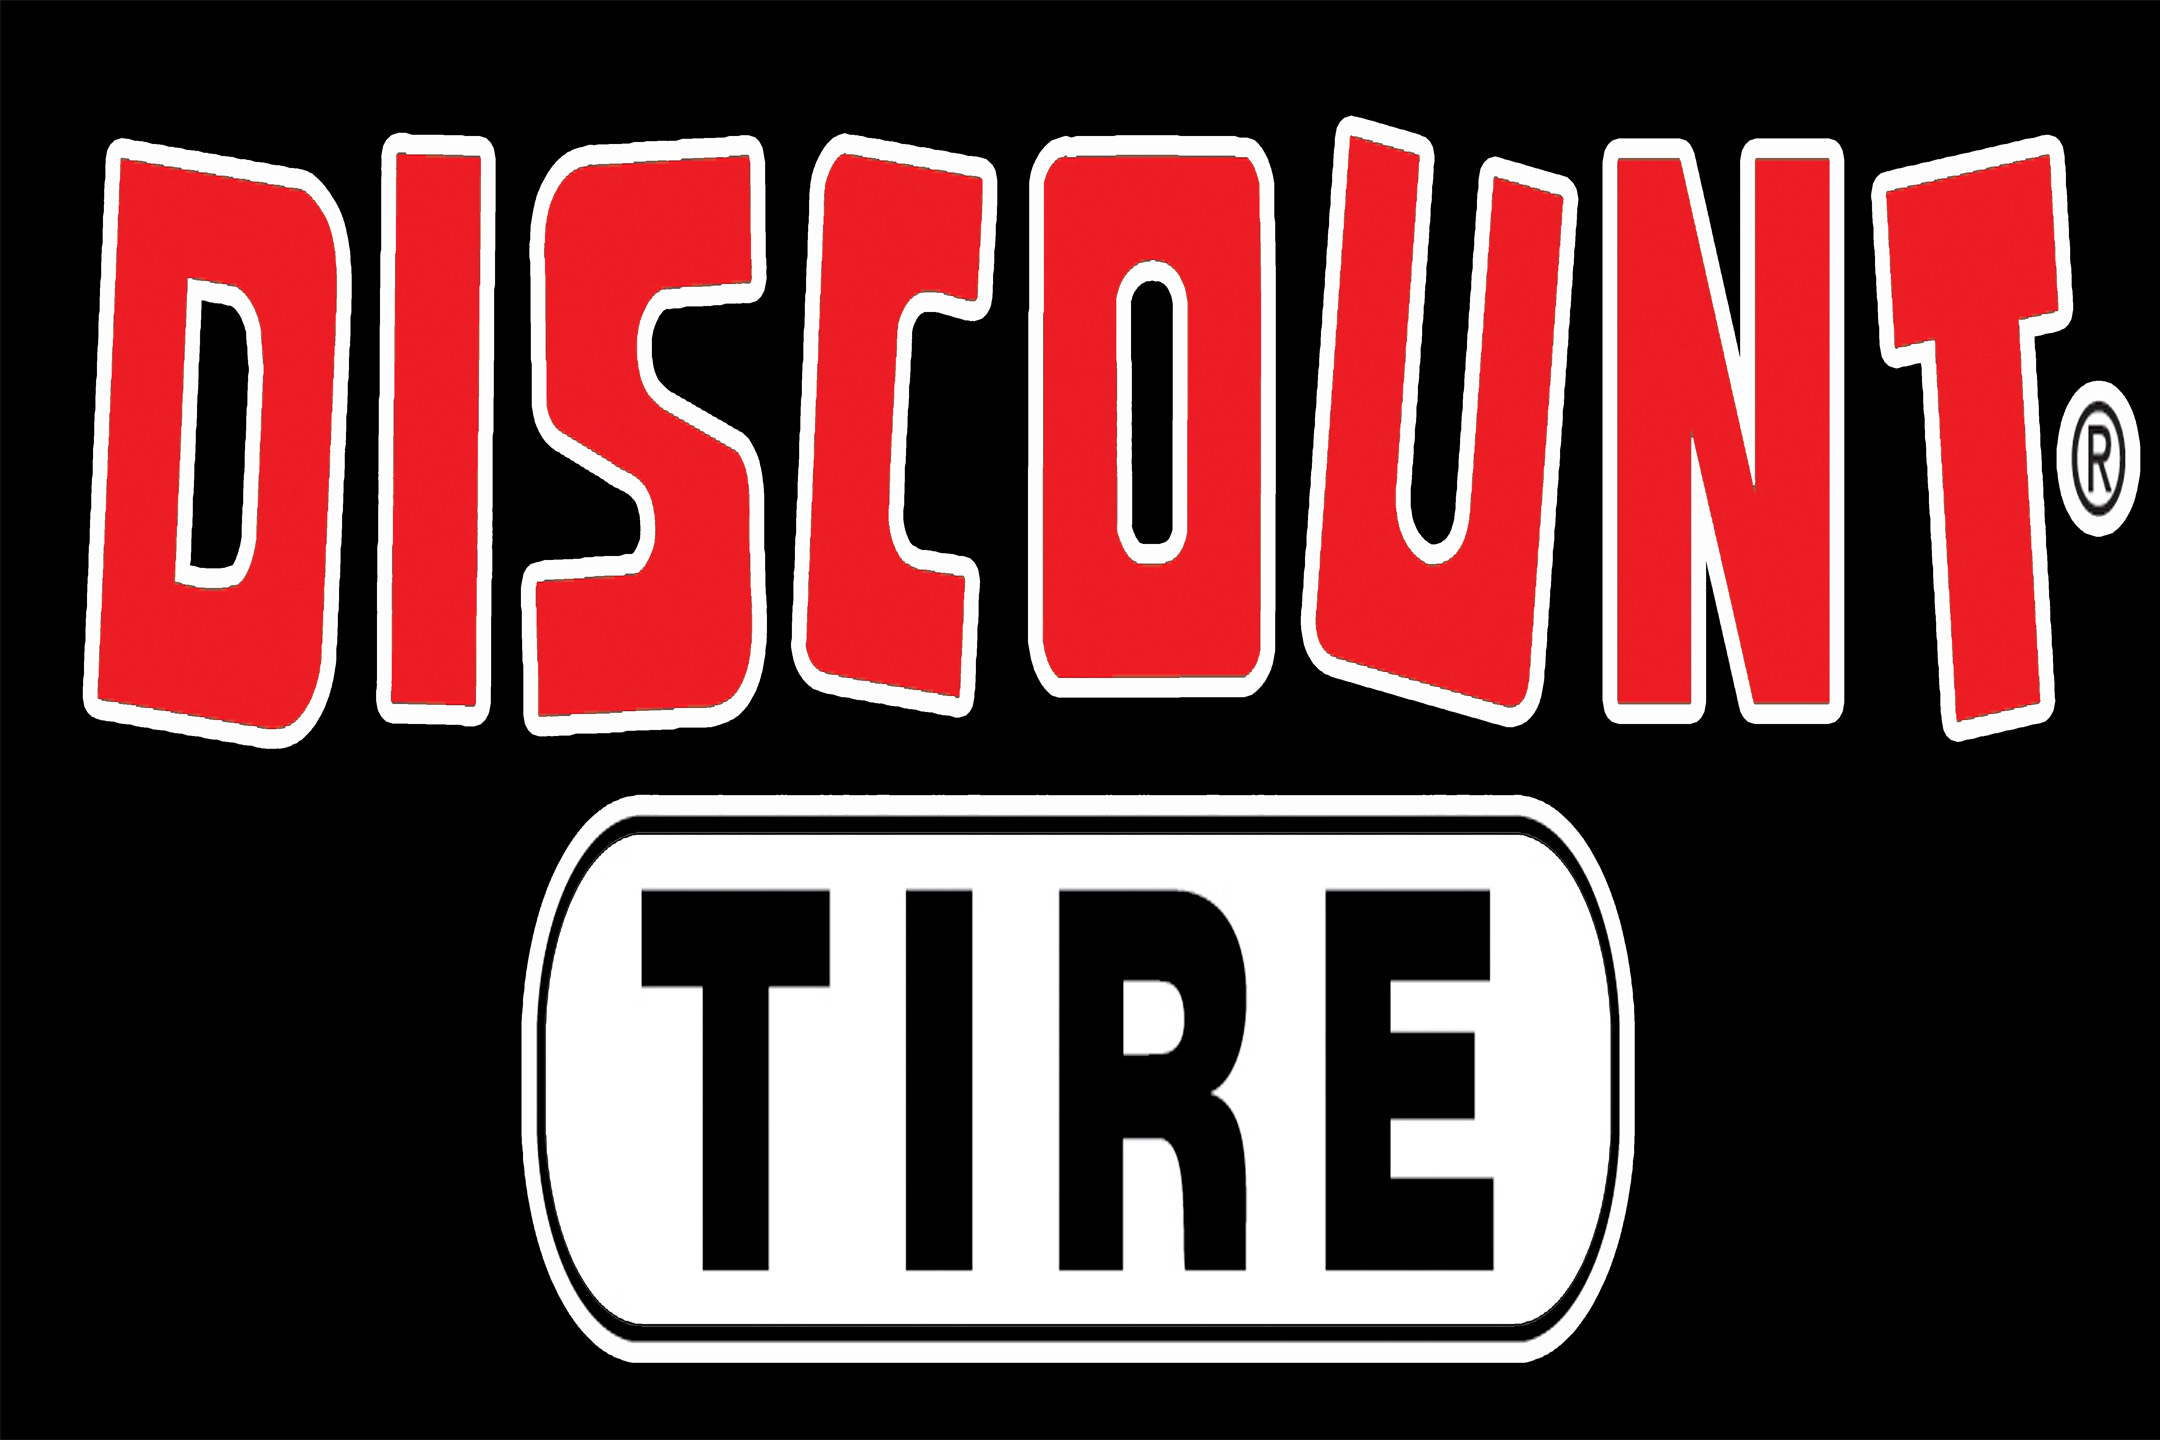 Discount Tire Logo drawing free image download